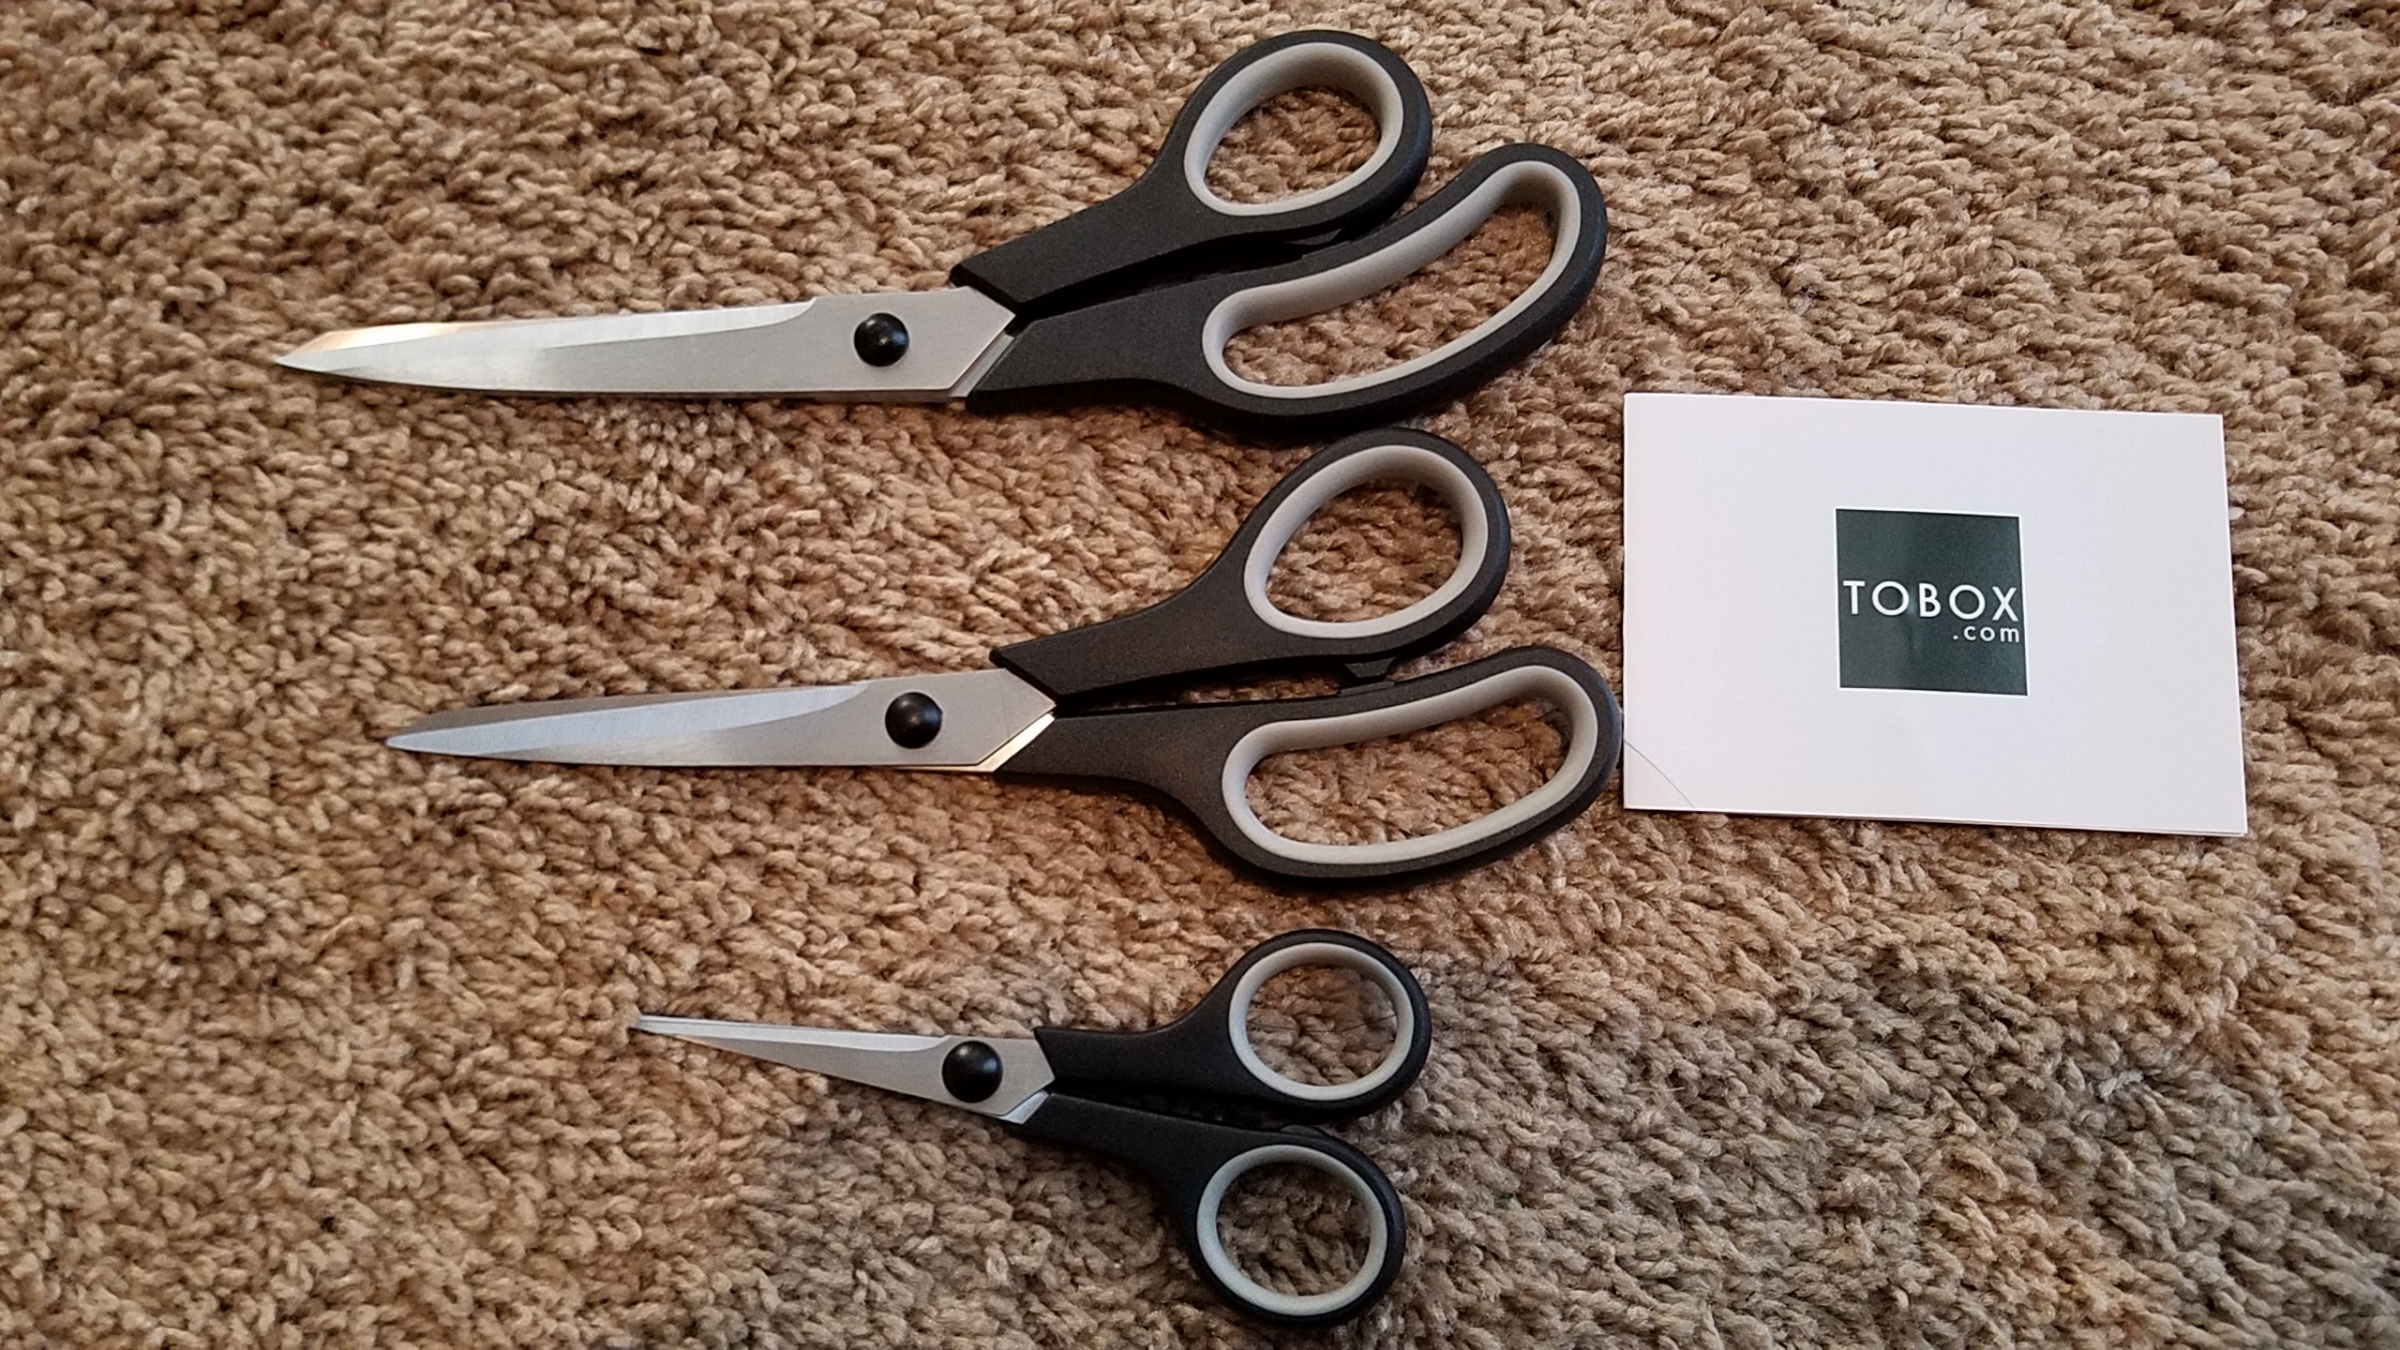 Awesome set of scissors at a decent price!